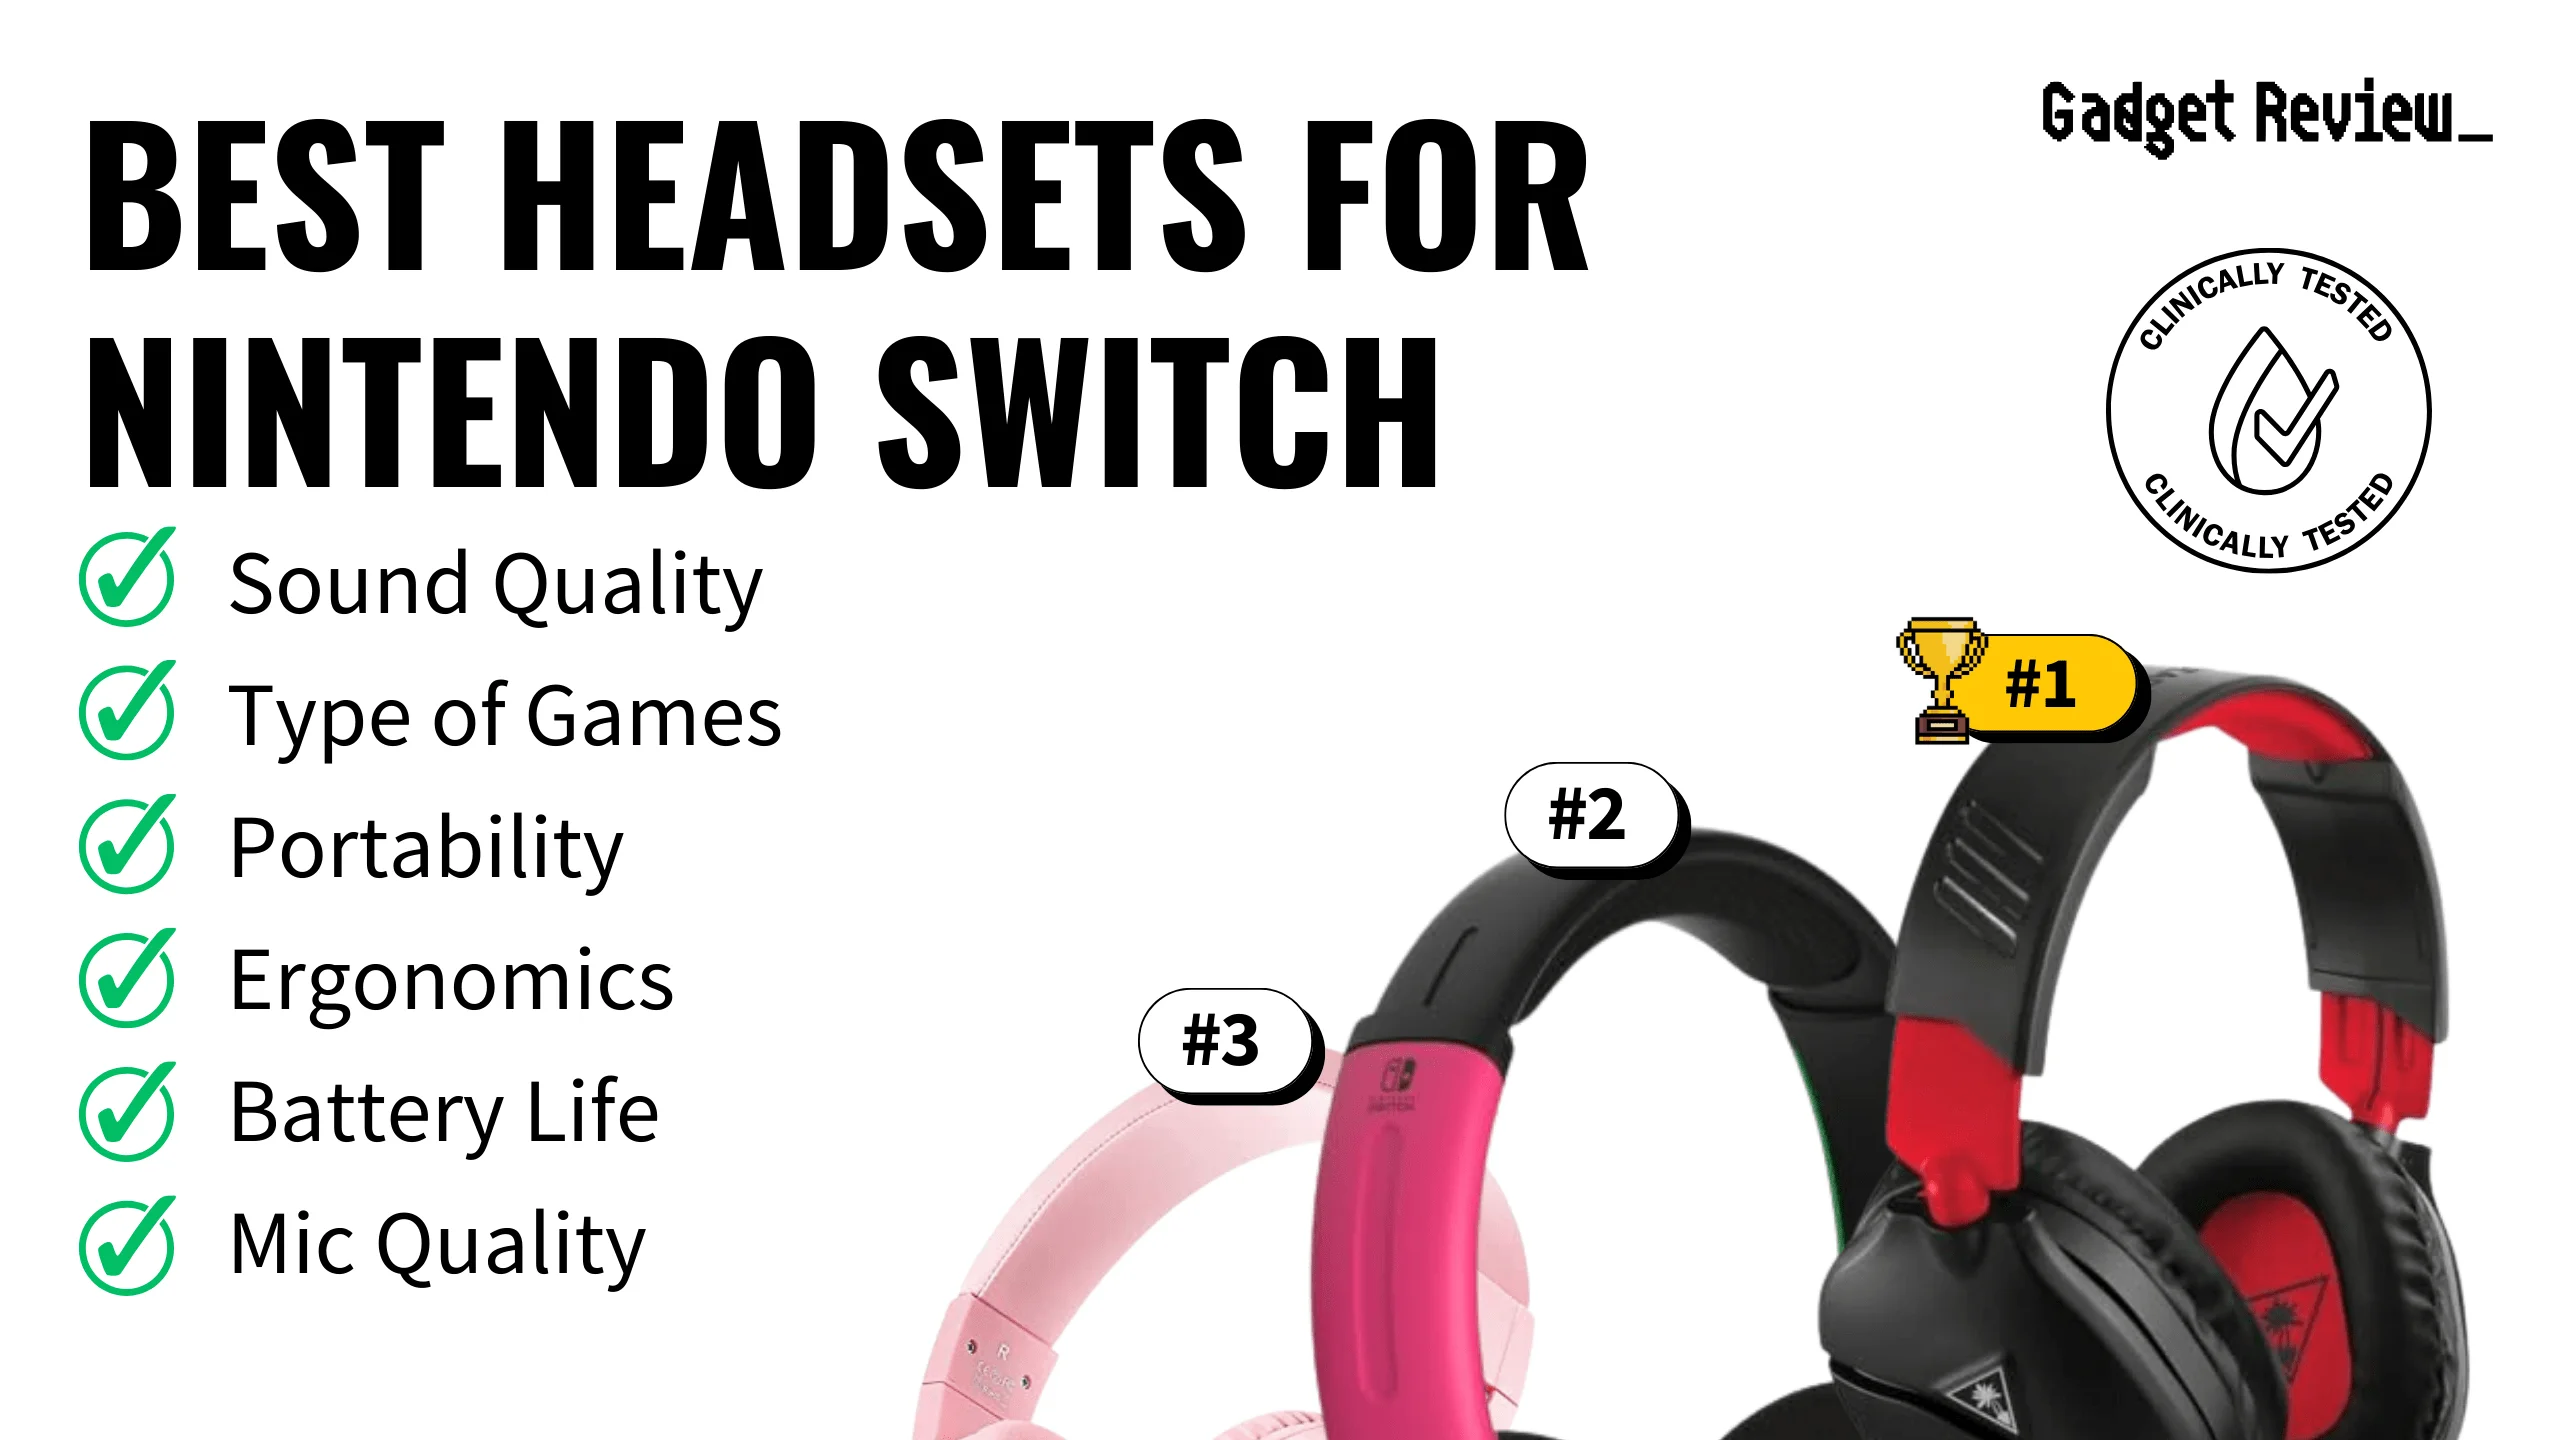 Best Headsets for Nintendo Switch